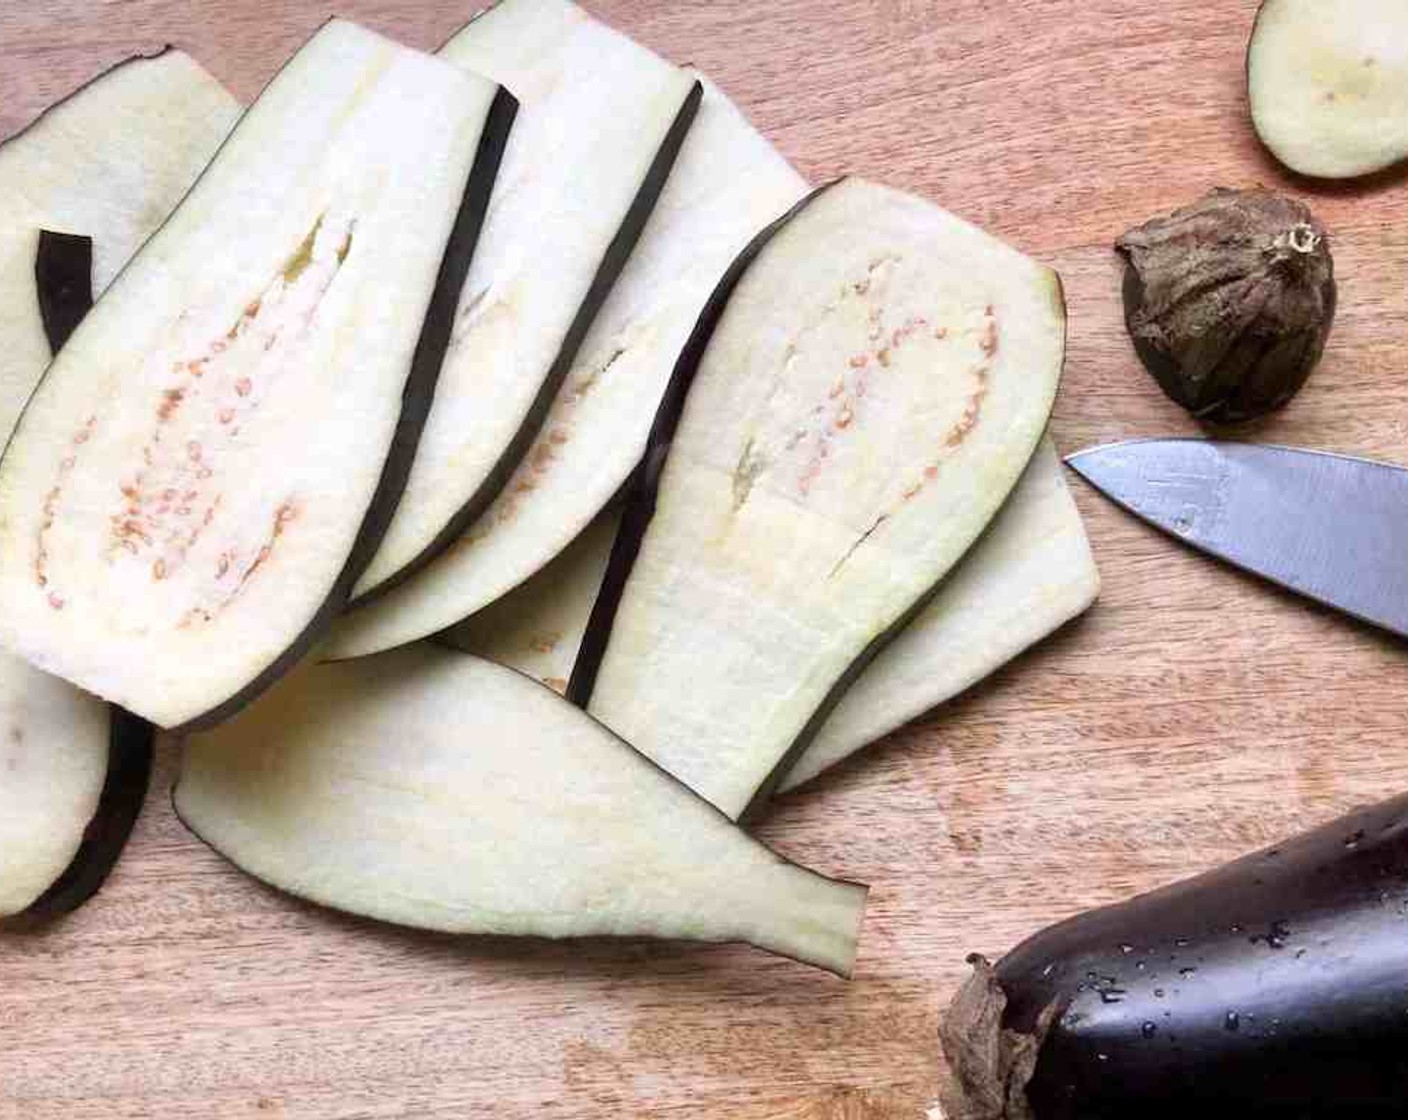 step 2 Slice the Eggplants (2) lengthwise into 1/8 to 1/4-inch thick slices. Sprinkle both sides generously with Kosher Salt (to taste) then arrange the eggplant slices in a single layer between several layers of paper towels.